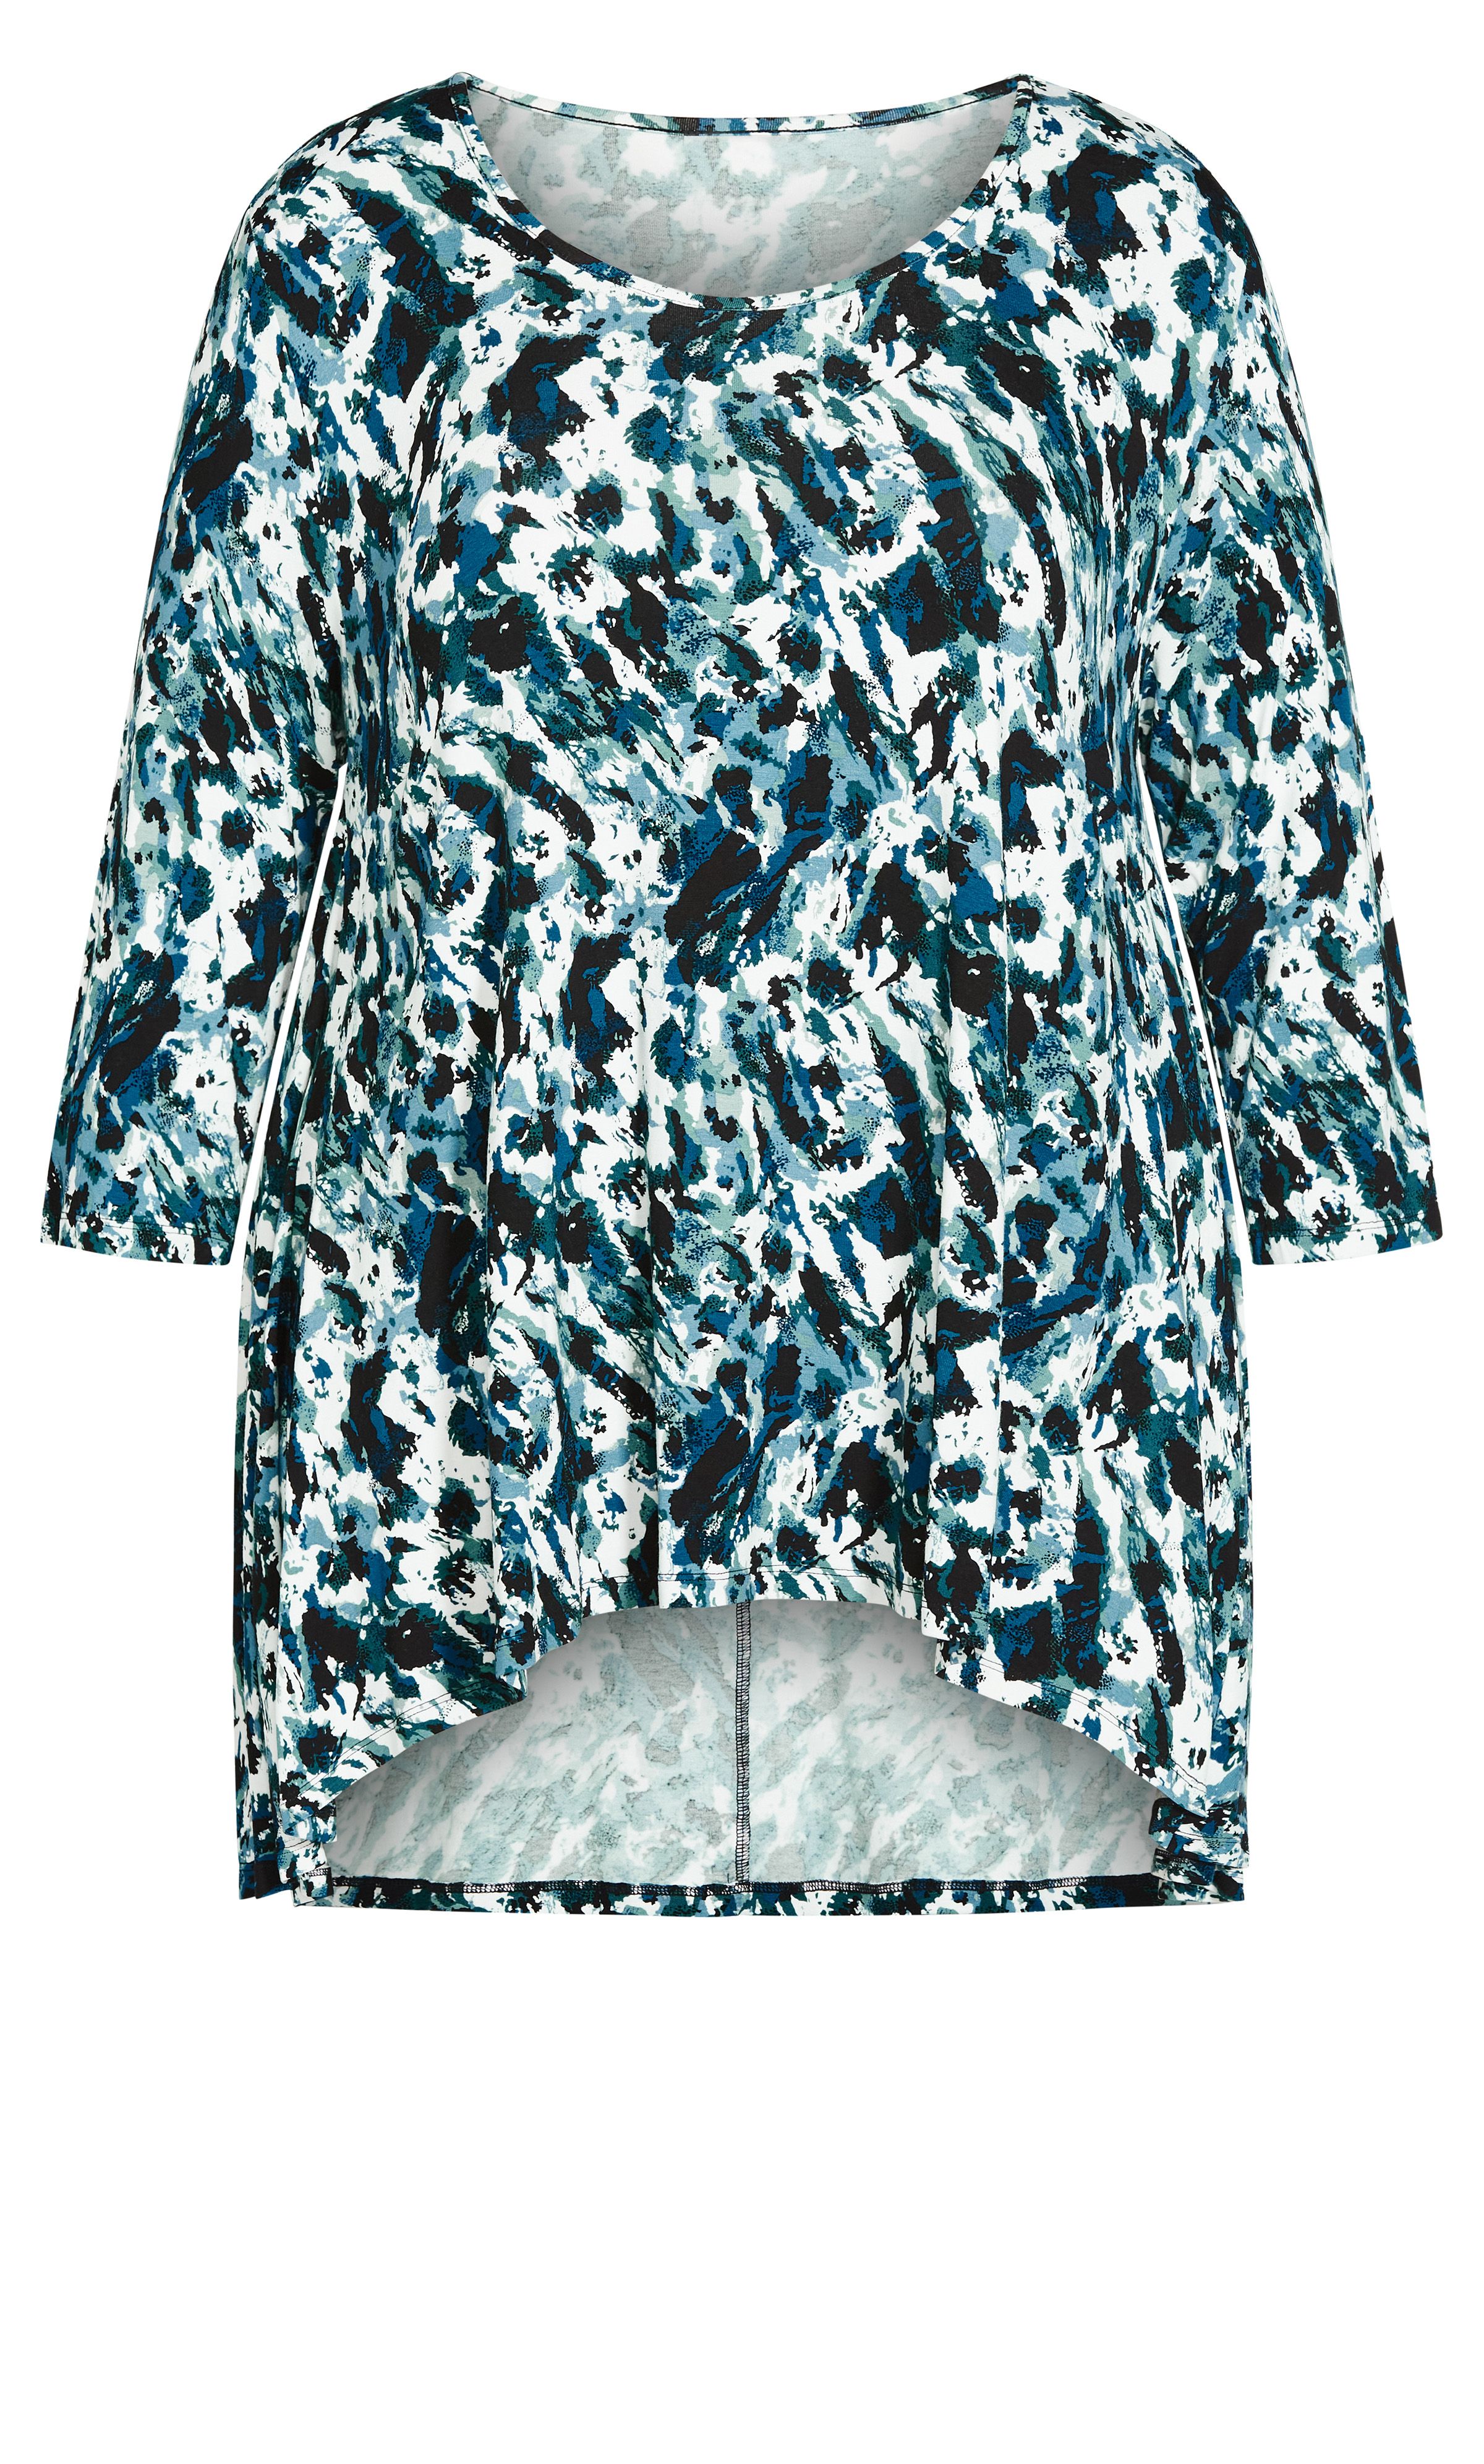 Upgrade your wardrobe with the Malabar 3/4 Sleeve Tunic. Stay on trend with the ultra cool blue brushstroke print and hi-lo hemline. Key Features Include: - Round neckline - Elbow-length sleeves - Pull-over fit - Flowy relaxed silhouette - Soft, stretch fabrication - Hi-lo below hip length hemline Upstyle your look with white skinny jeans and espadrille platform sandals.